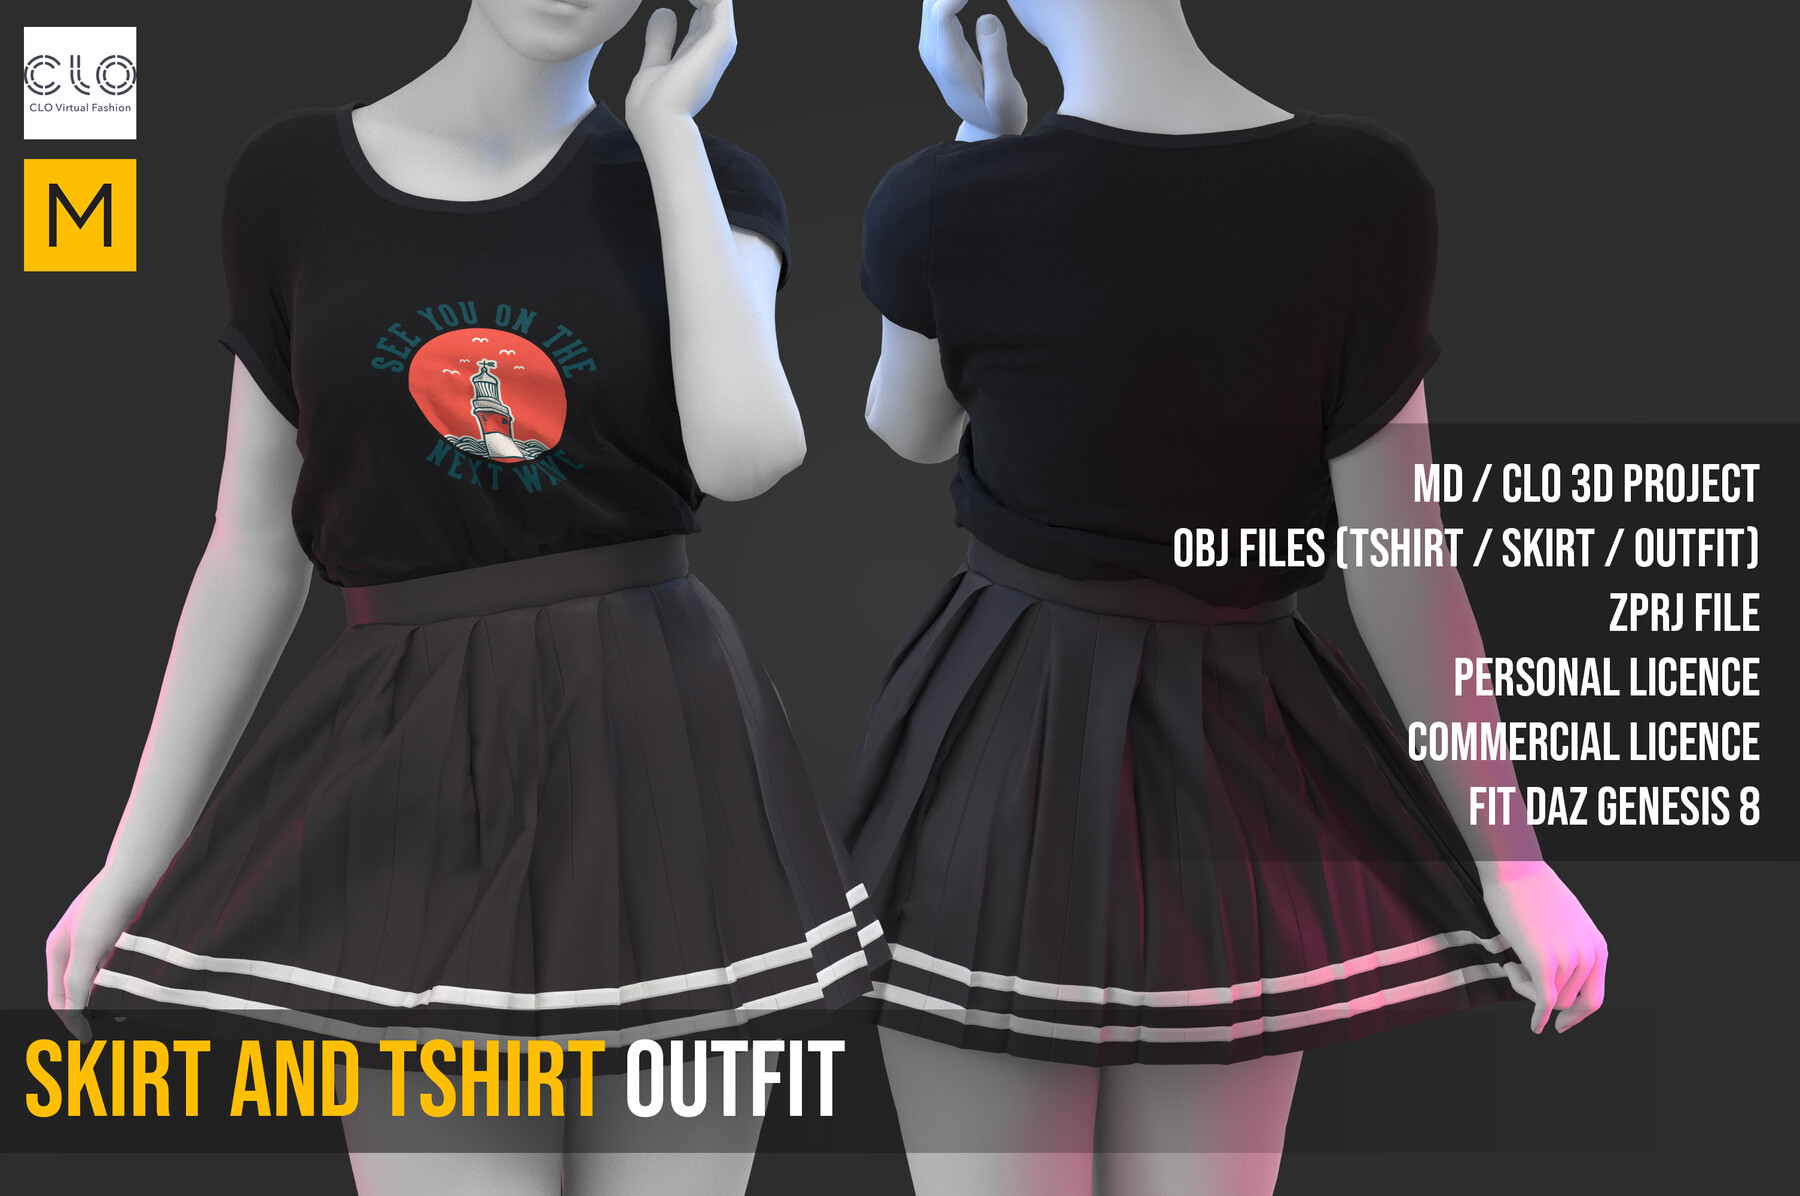 ArtStation - Pleated skirt and tshirt outfit MD / CLO3D / OBJ / ZPRJ ...